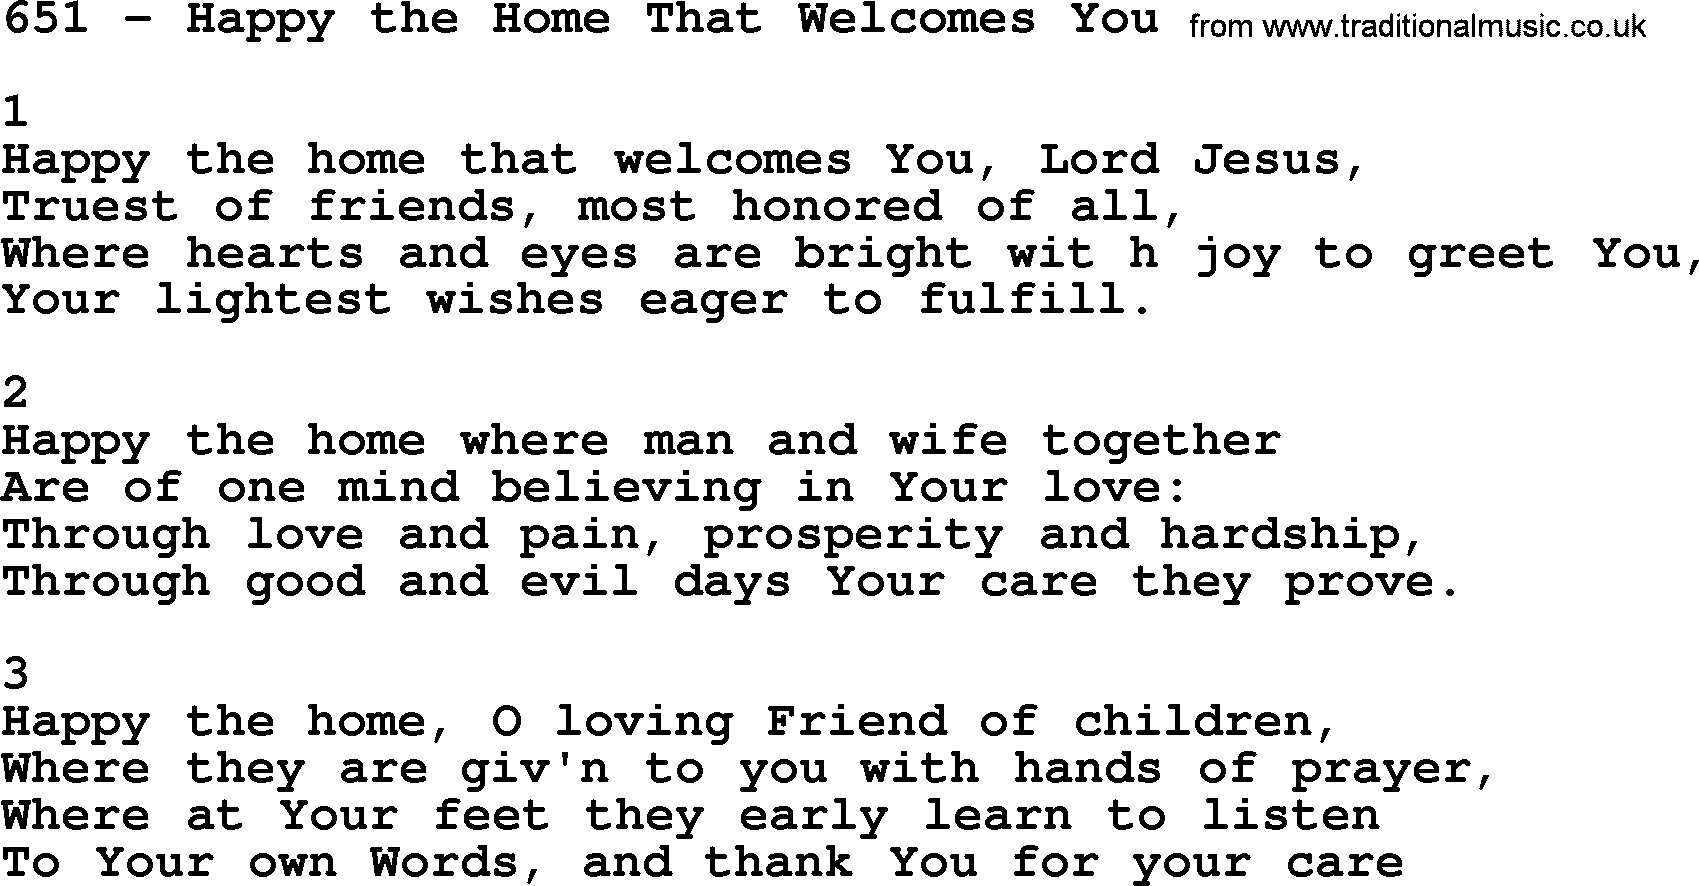 Complete Adventis Hymnal, title: 651-Happy The Home That Welcomes You, with lyrics, midi, mp3, powerpoints(PPT) and PDF,